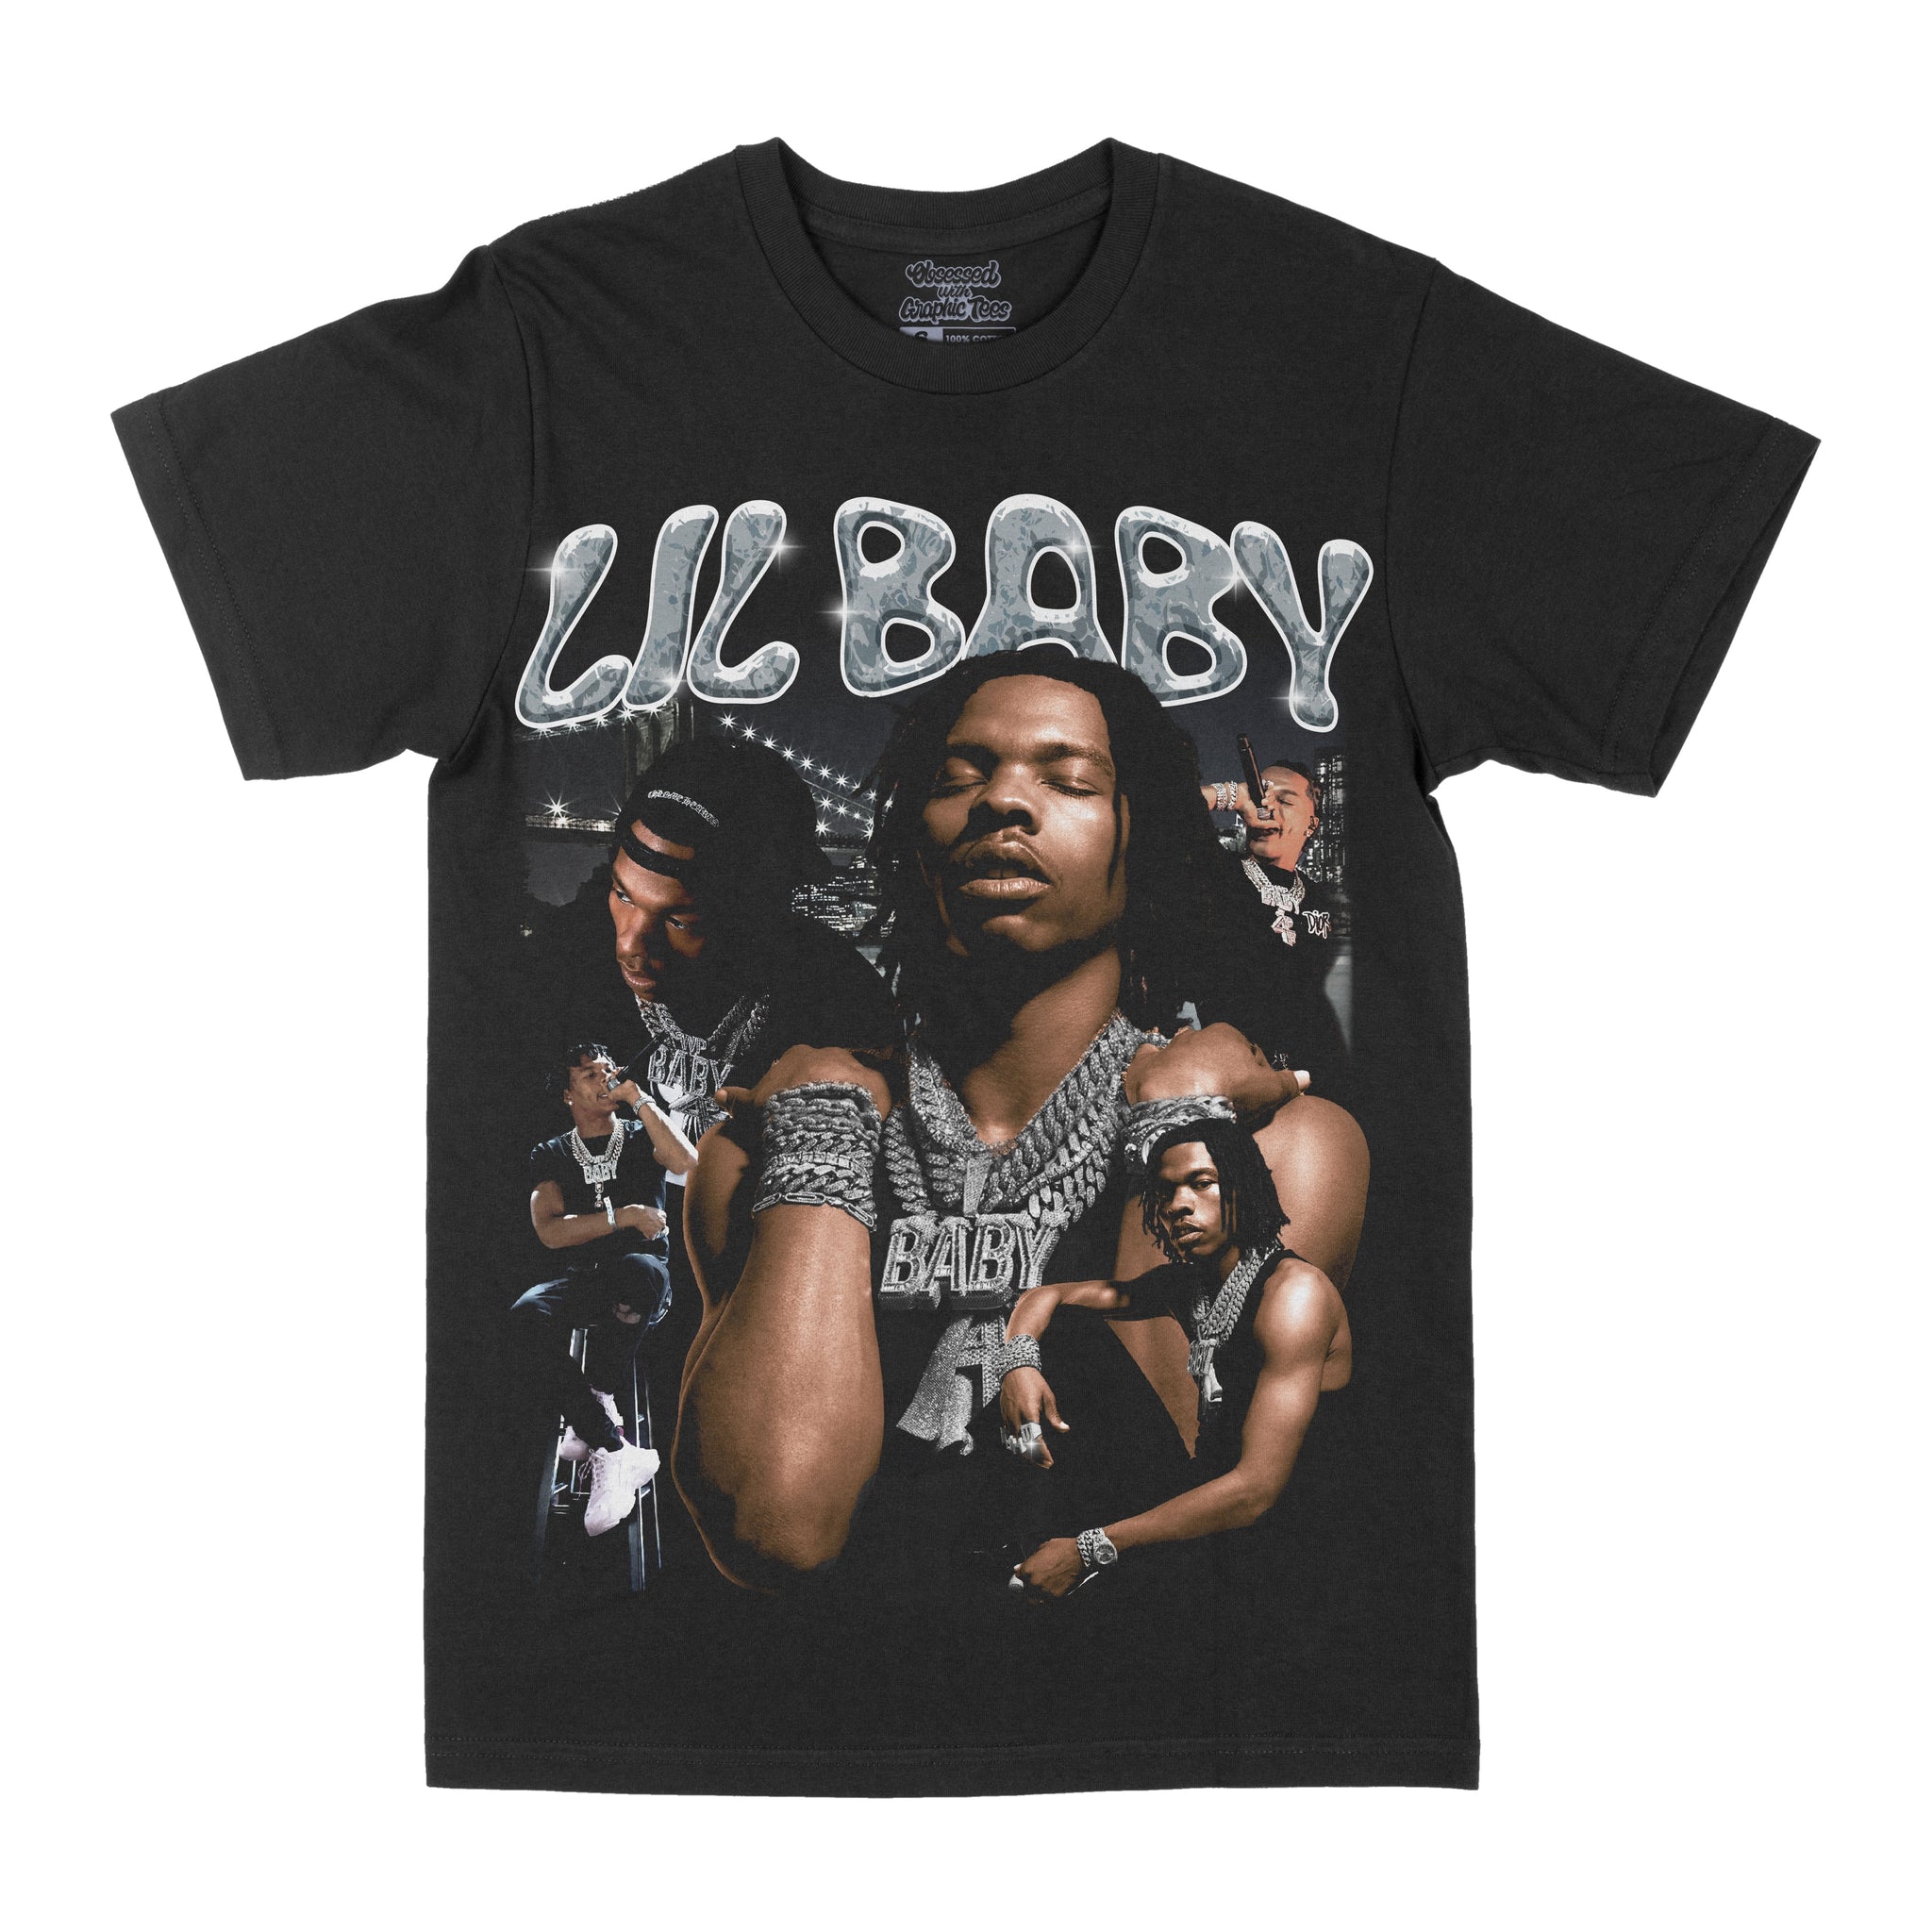 Lil Baby "Chains" Graphic Tee